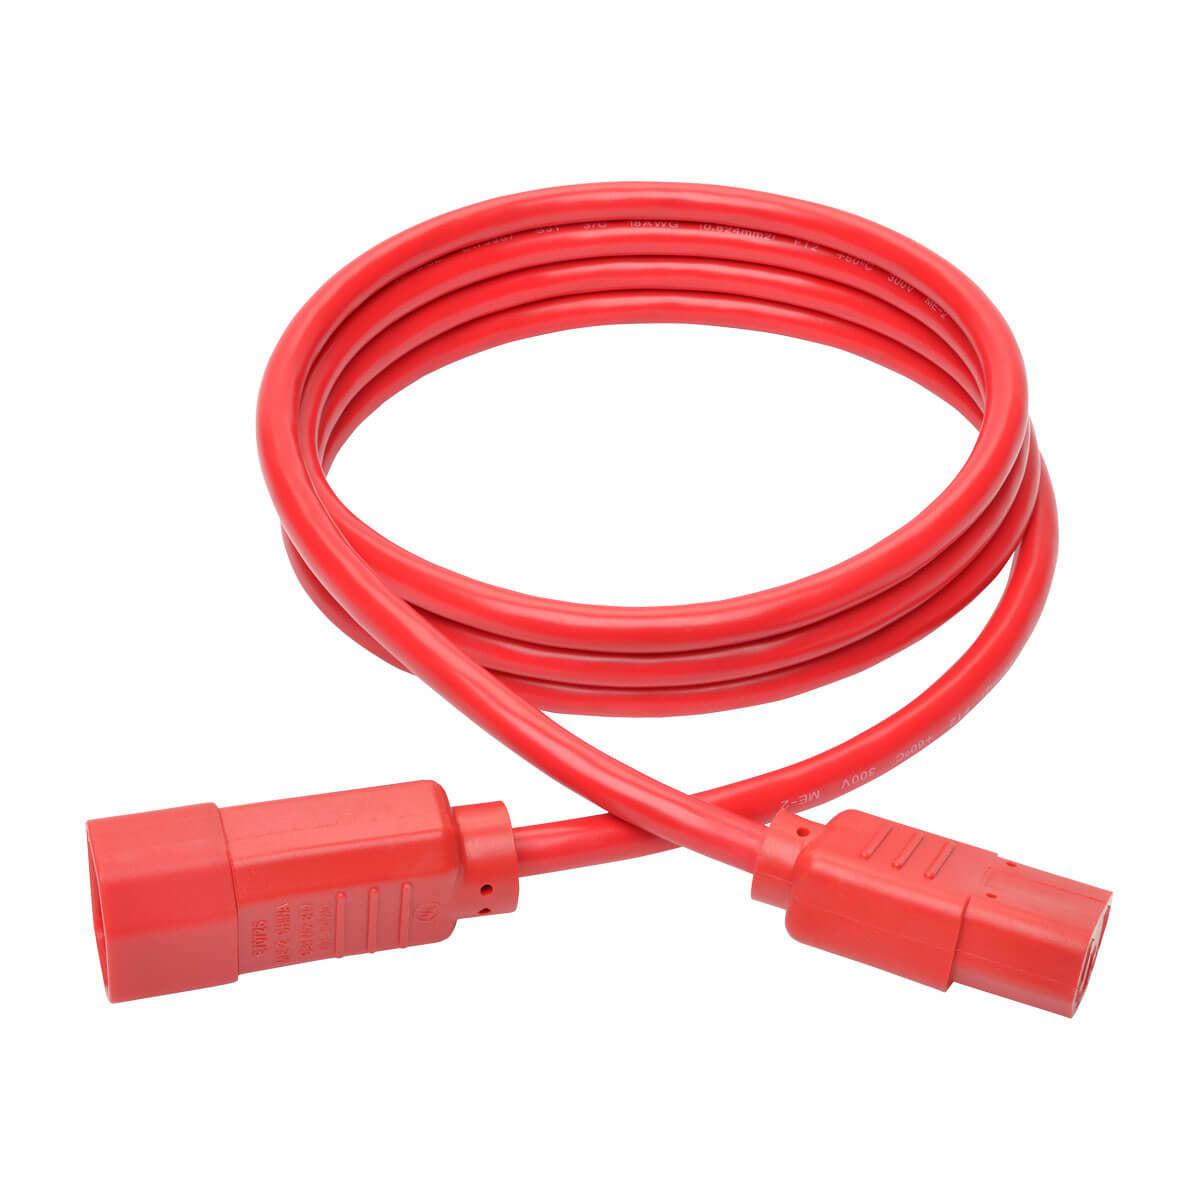 Tripp Lite P004-006-Ard Pdu Power Cord, C13 To C14 - 10A, 250V, 18 Awg, 6 Ft. (1.83 M), Red